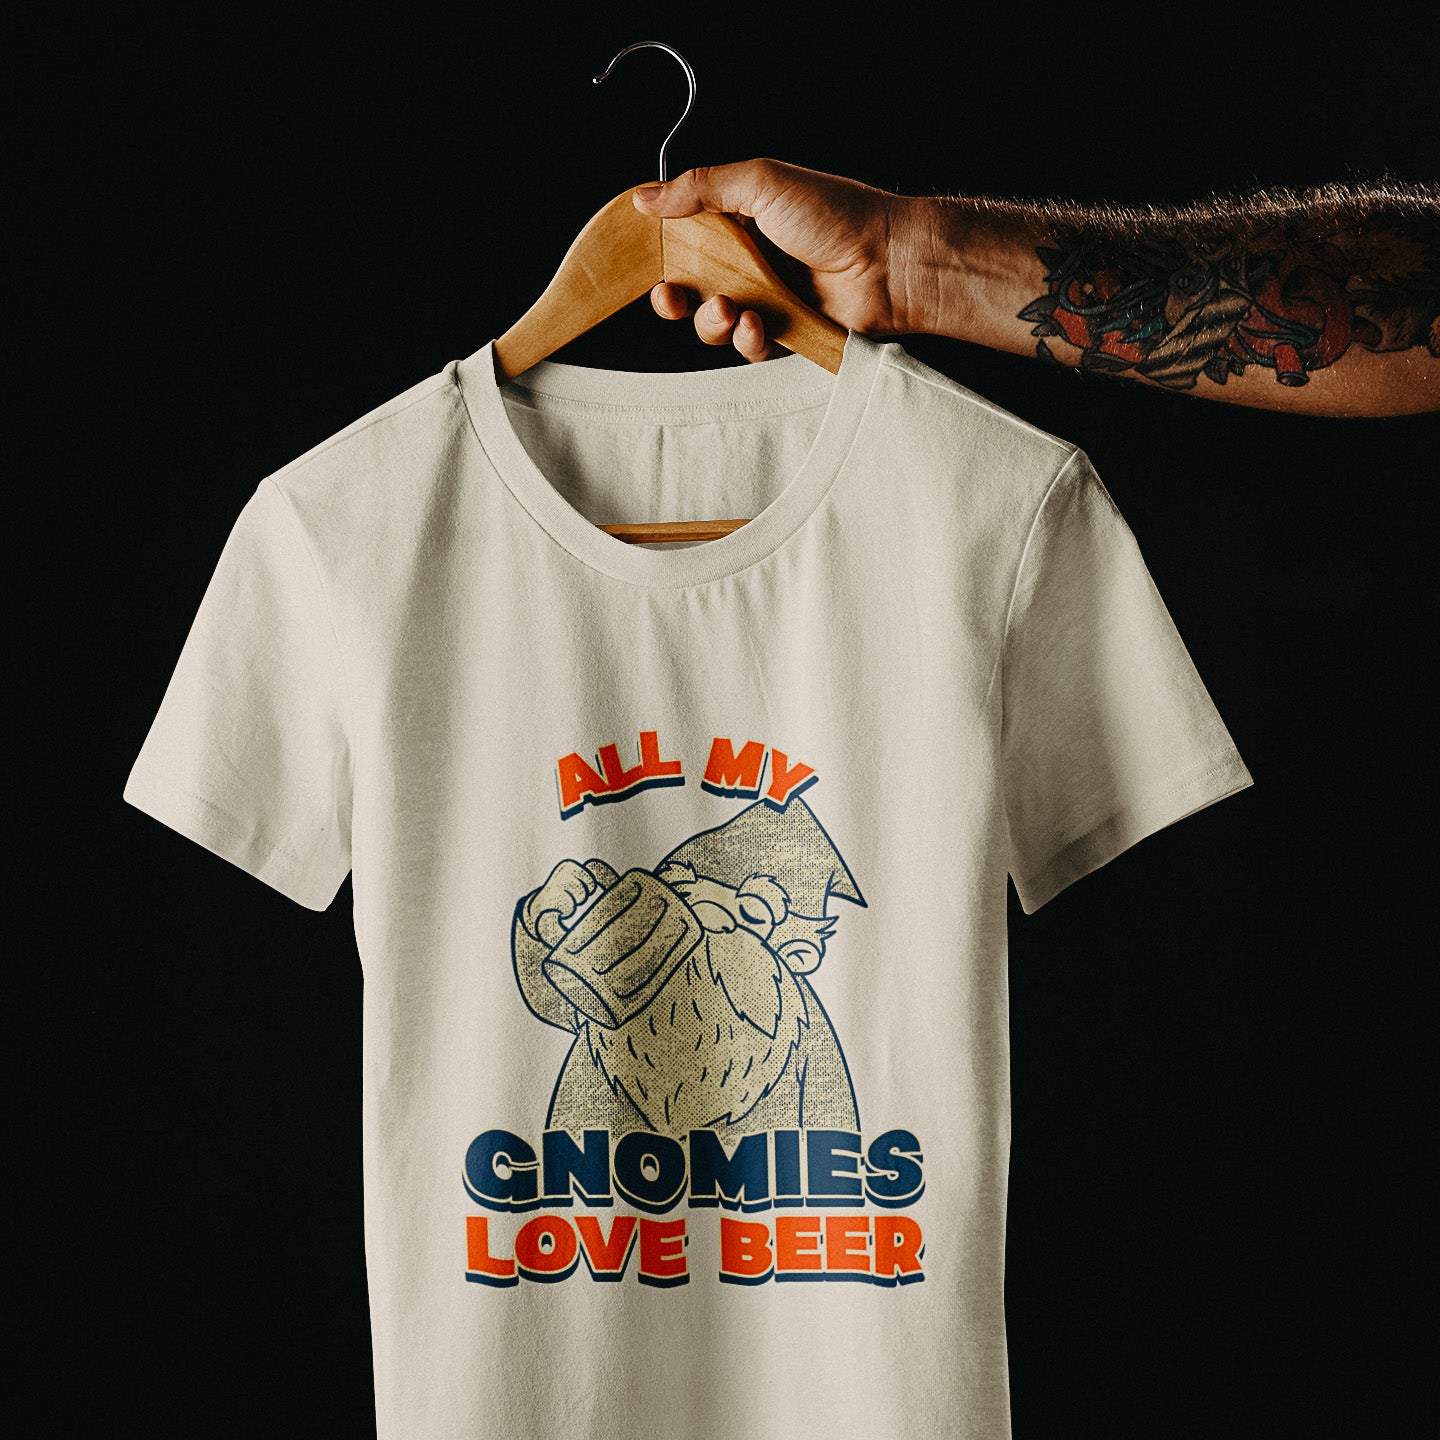 T-shirt - "ALL MY GNOMIES LOVE BEER"